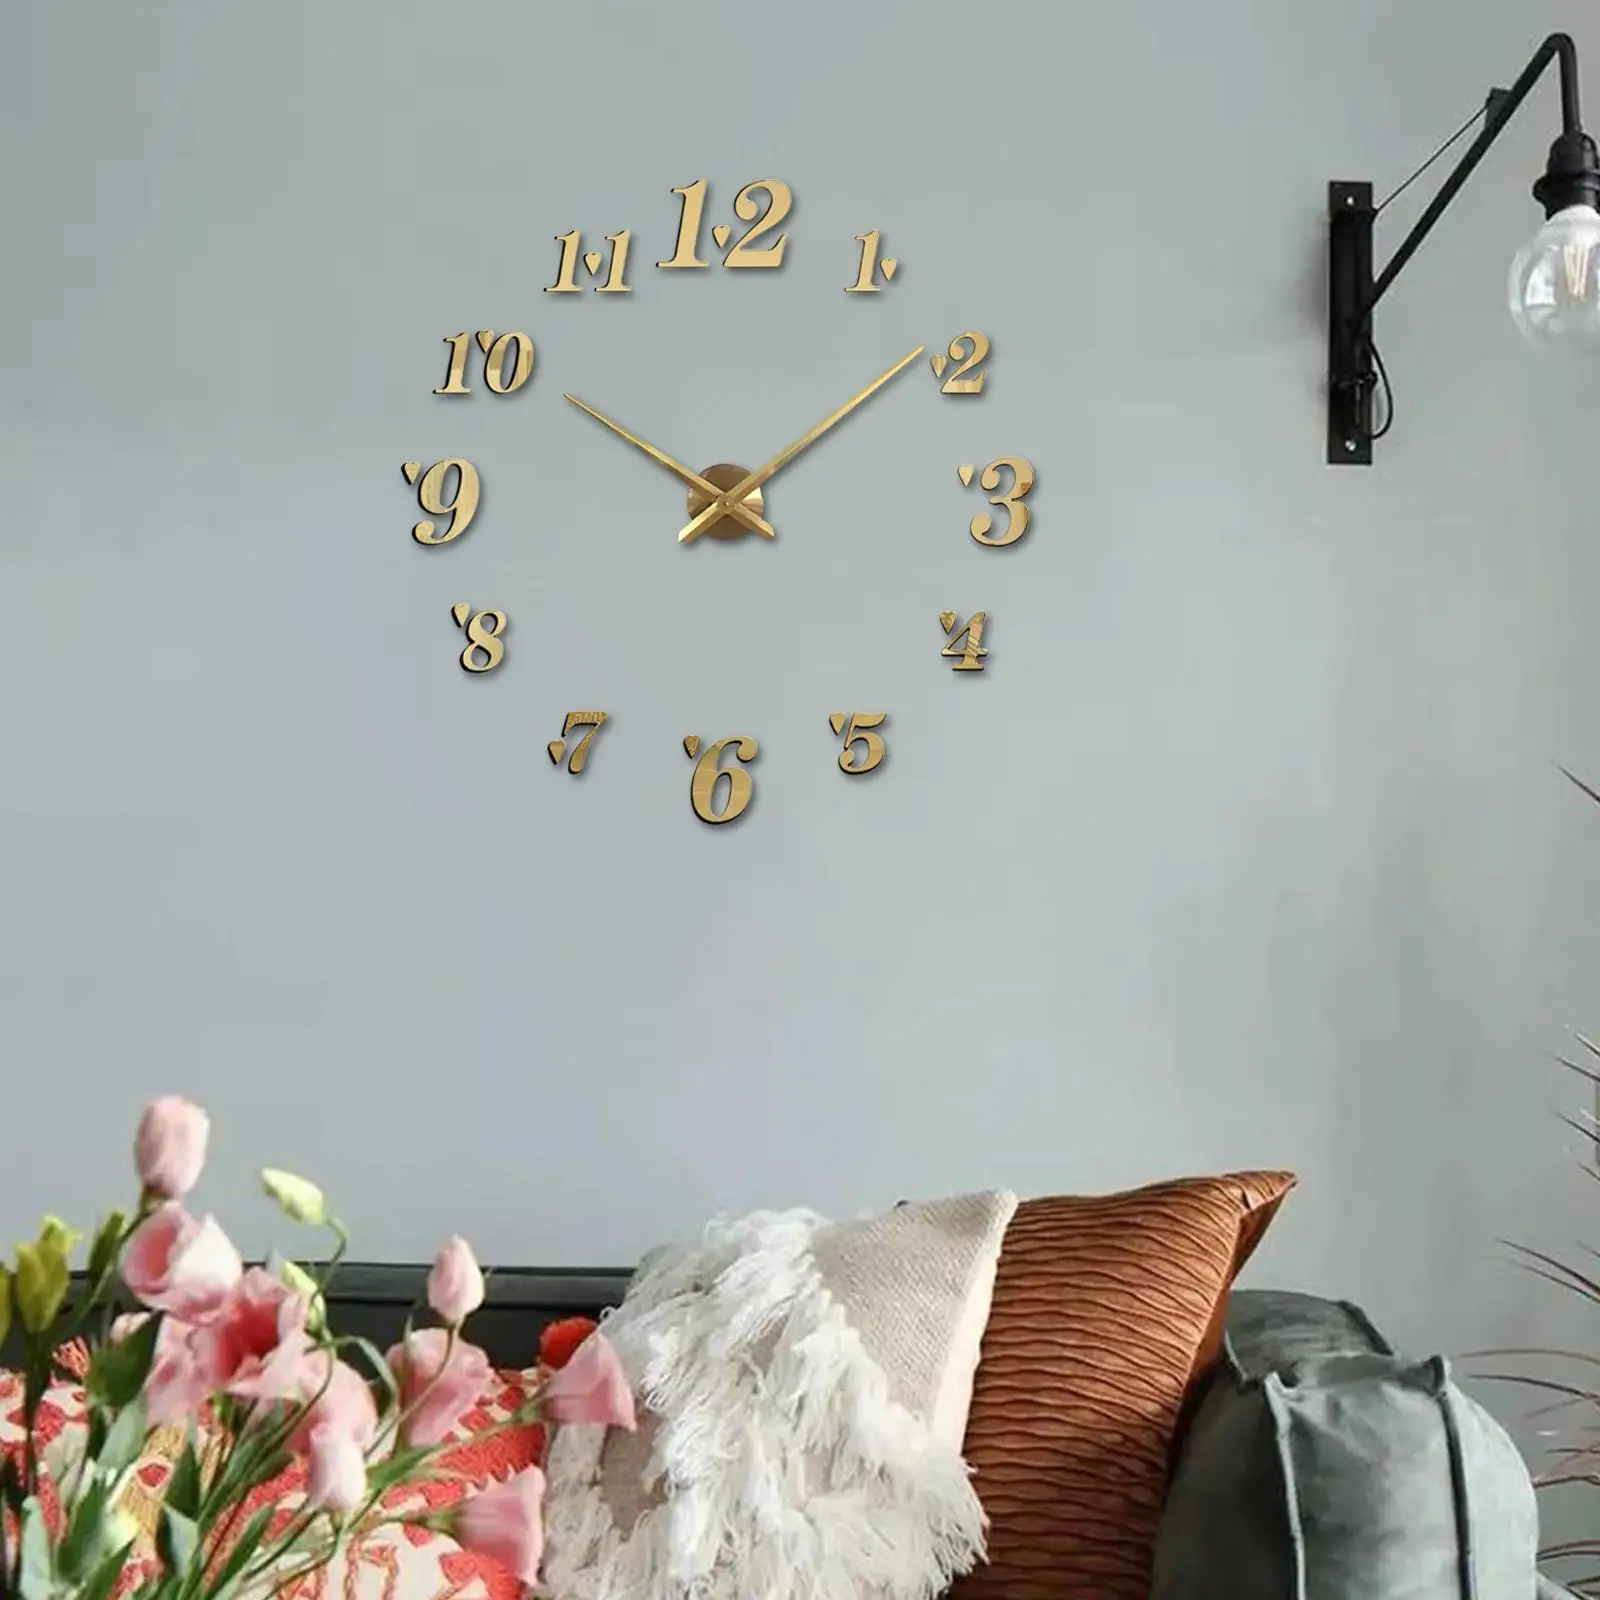 Acrylic DIY 3D Wall Clock Wall Stickers Arabic Numerals Clock Battery Powered Frameless for Home Kitchen Bedroom Office Decor